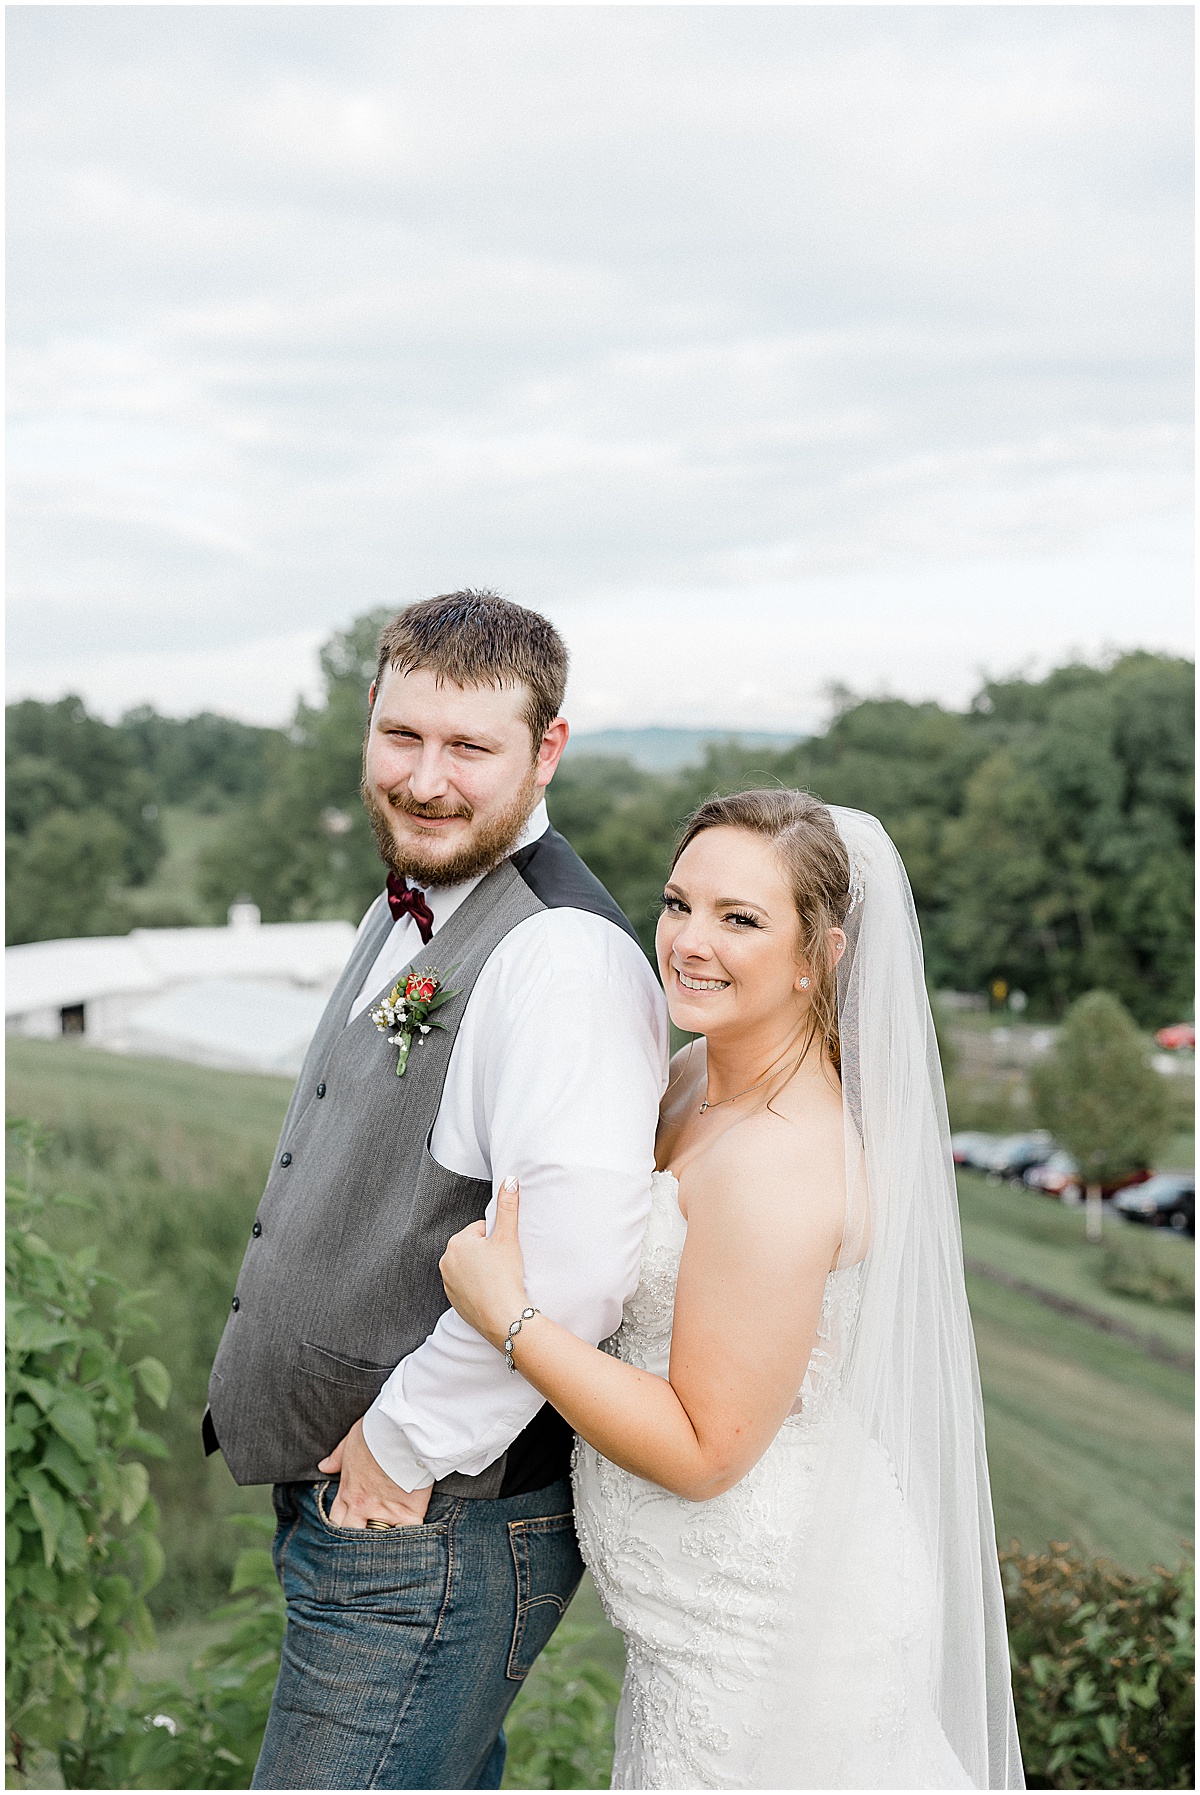 Brittany and Dustin’s fall Sunflower Hill Farms wedding in Augusta, Missouri photographed by Kaitlin Mendoza Photography.